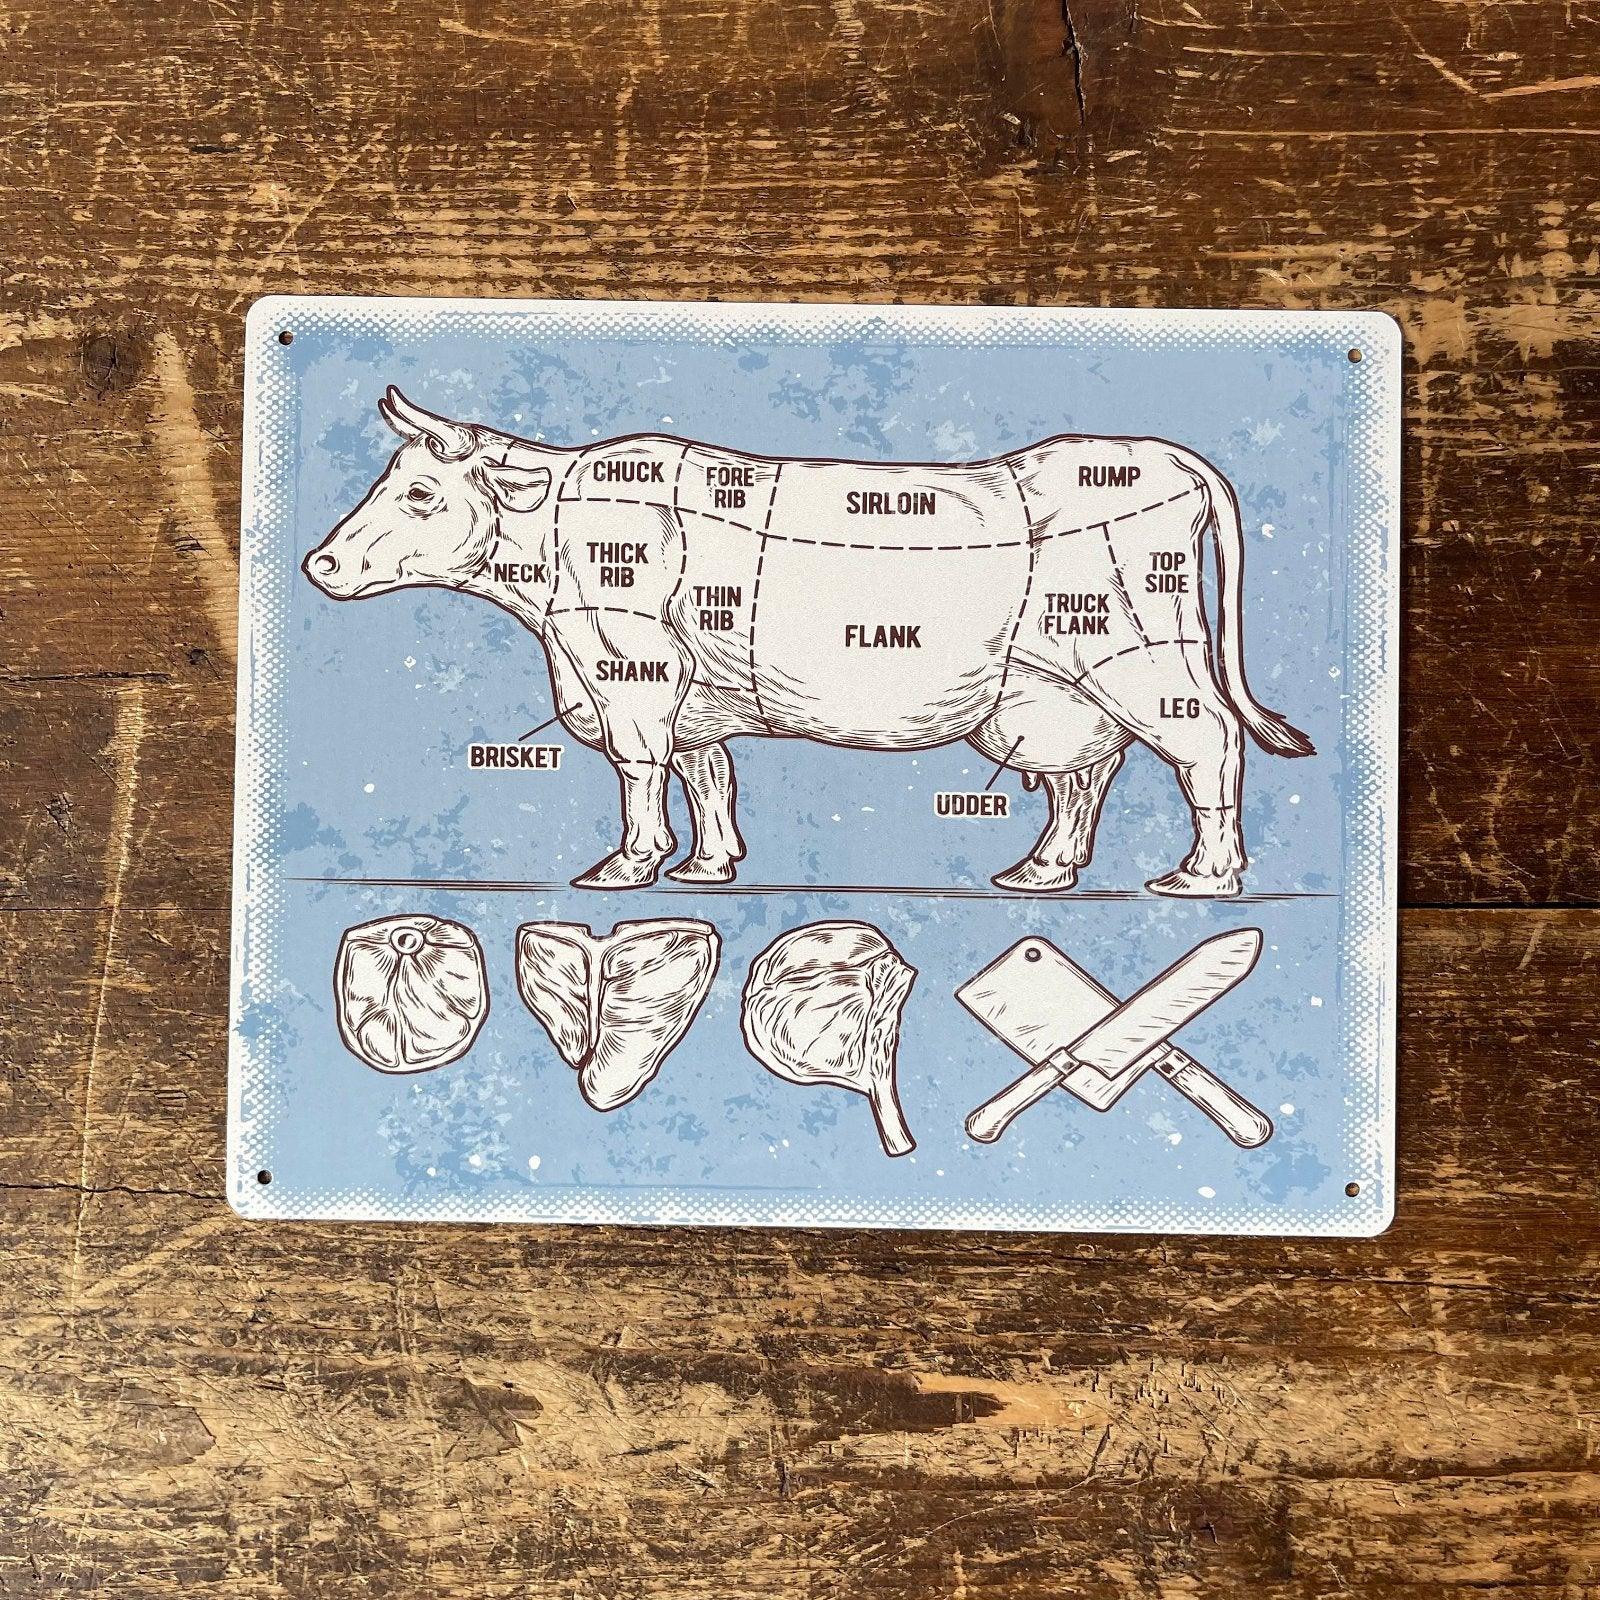 Vintage Metal Sign - Butchers Cuts of Beef Retro Sign - £18.99 - Retro Advertising 